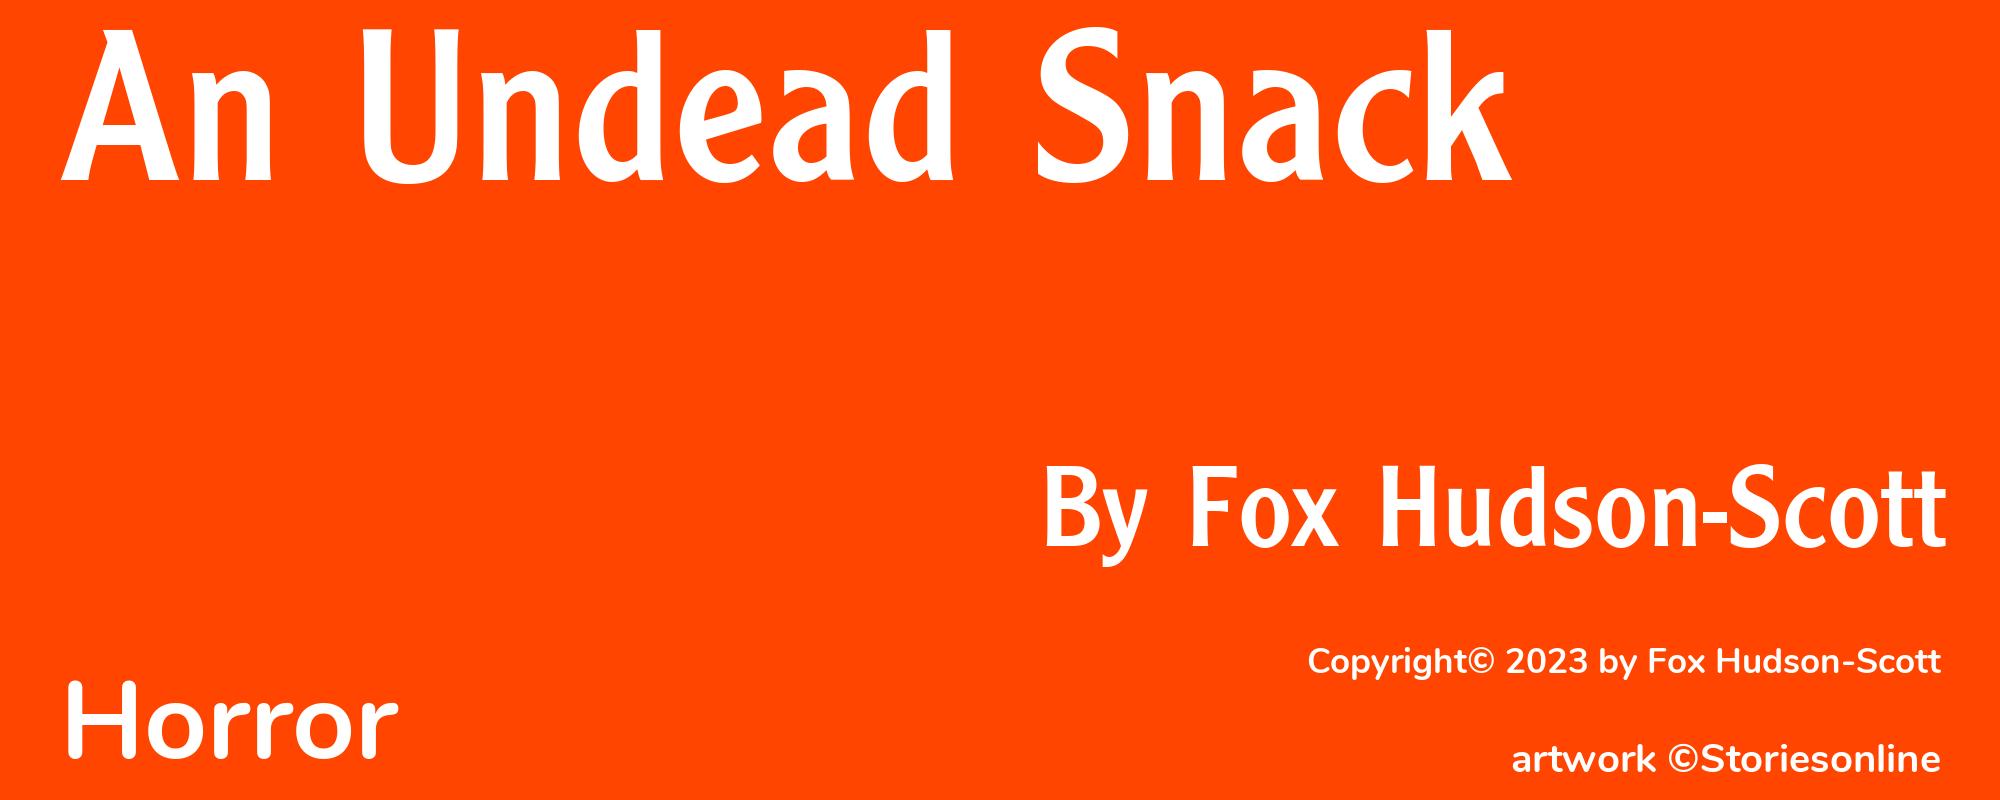 An Undead Snack - Cover